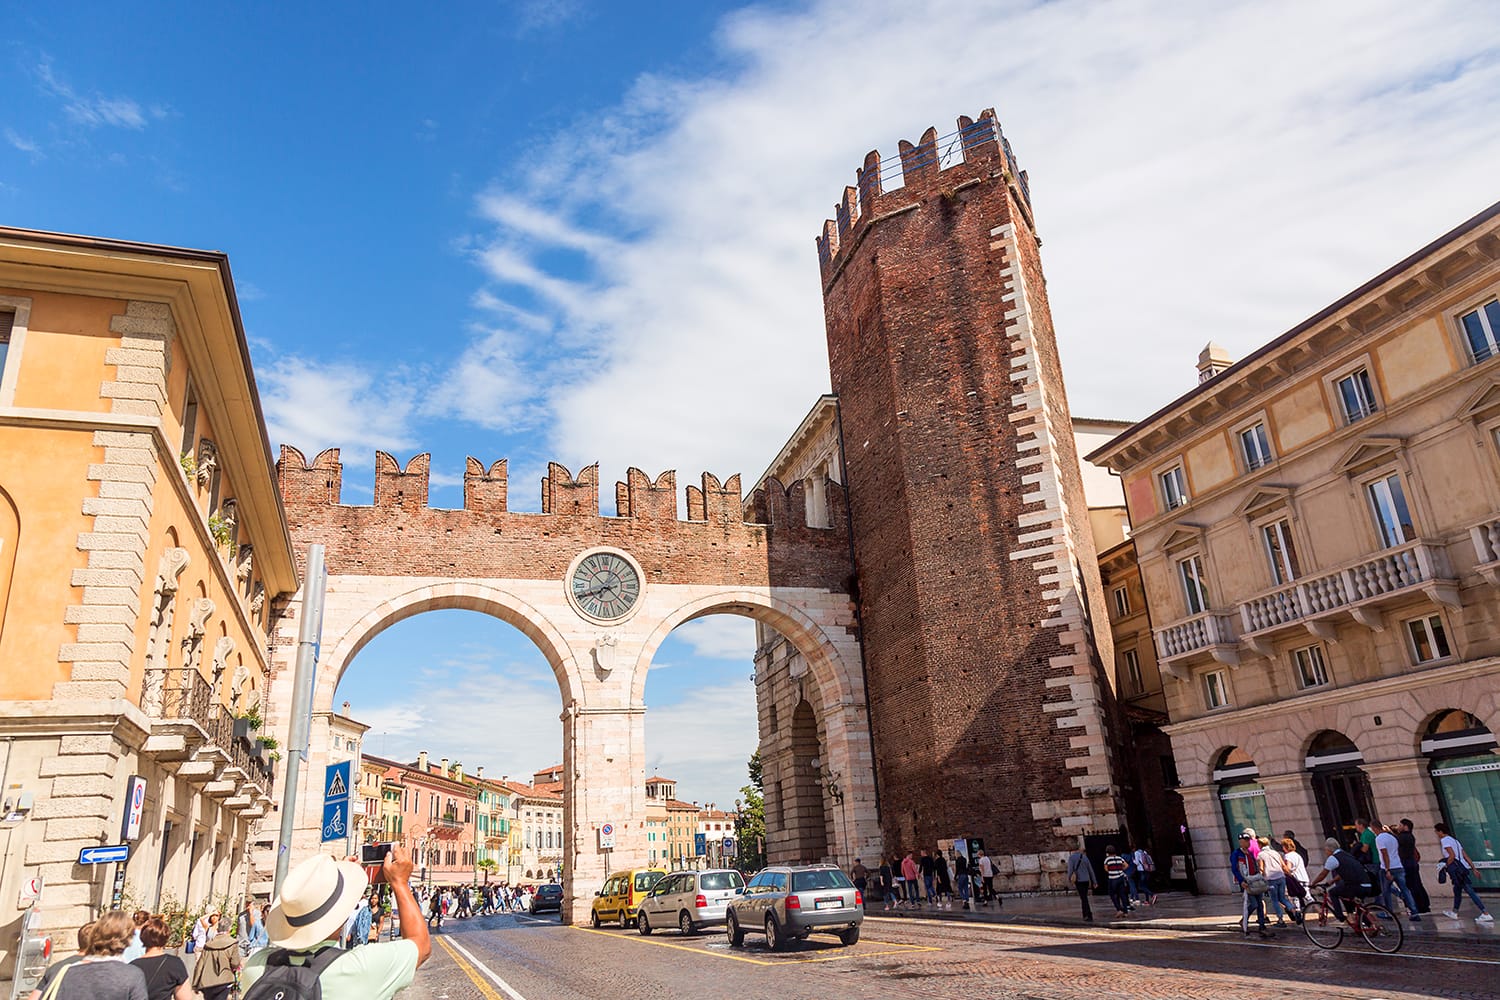 Medieval Porta Nuova, gate to the old town of Verona, Italy